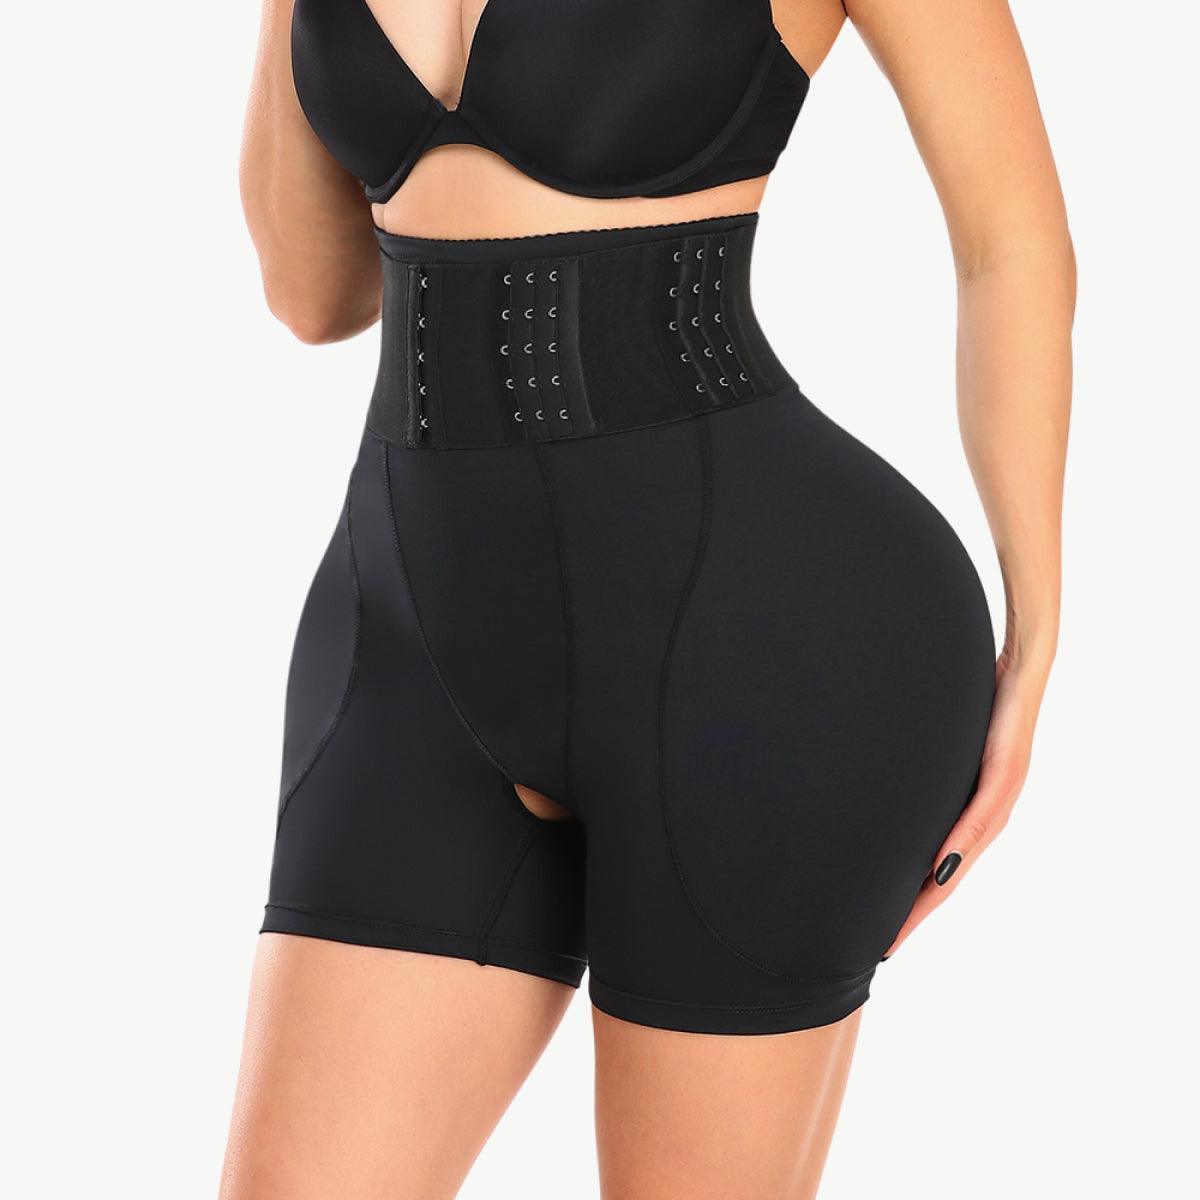 Butt & Hip Lifter Shaping Shorts with Removable Pad - MXSTUDIO.COM